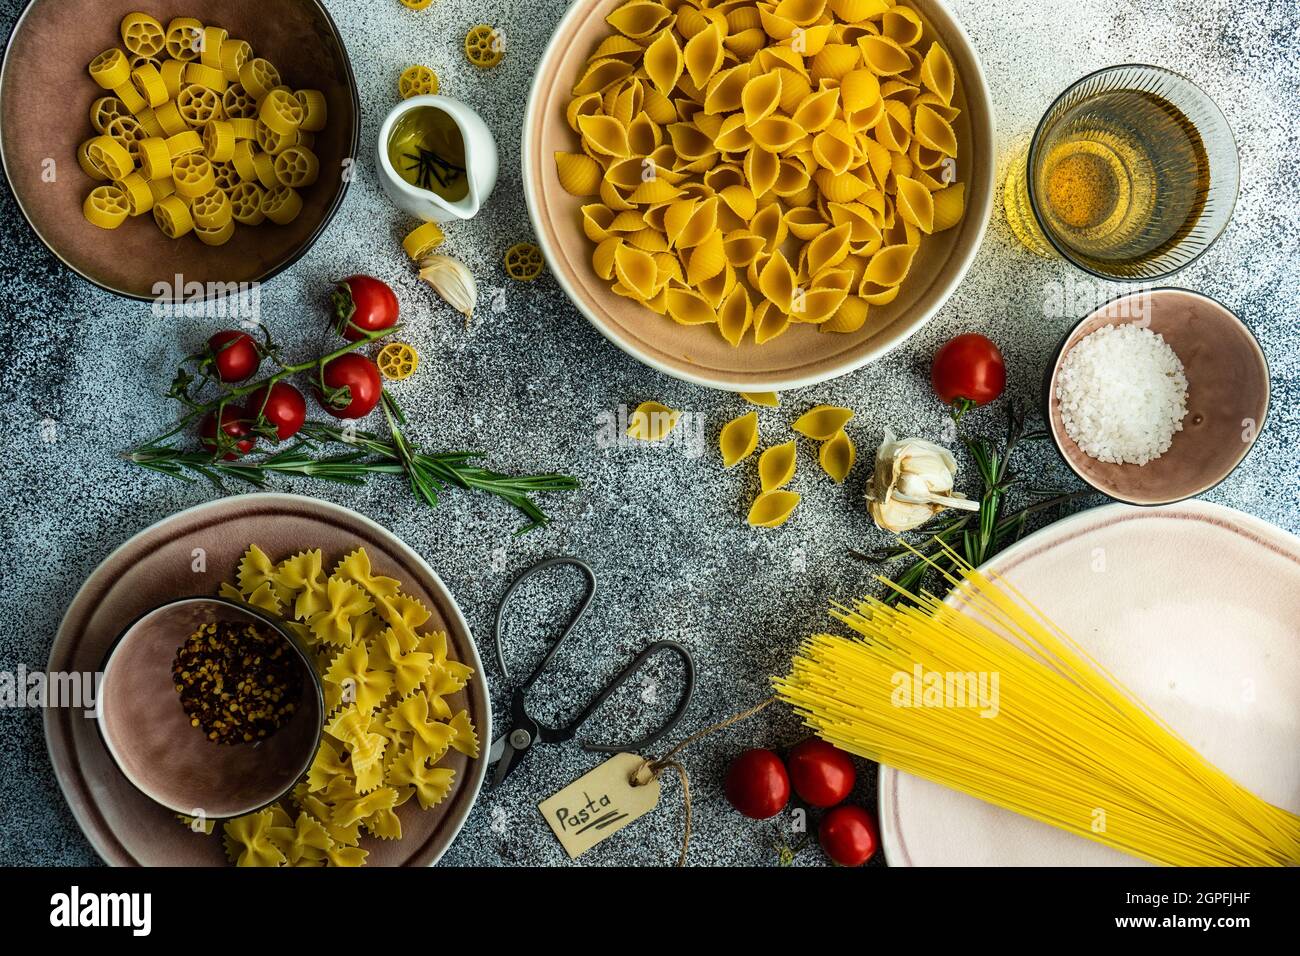 Italian pasta cooking concept with variety of pasta, spices and vegetables Stock Photo